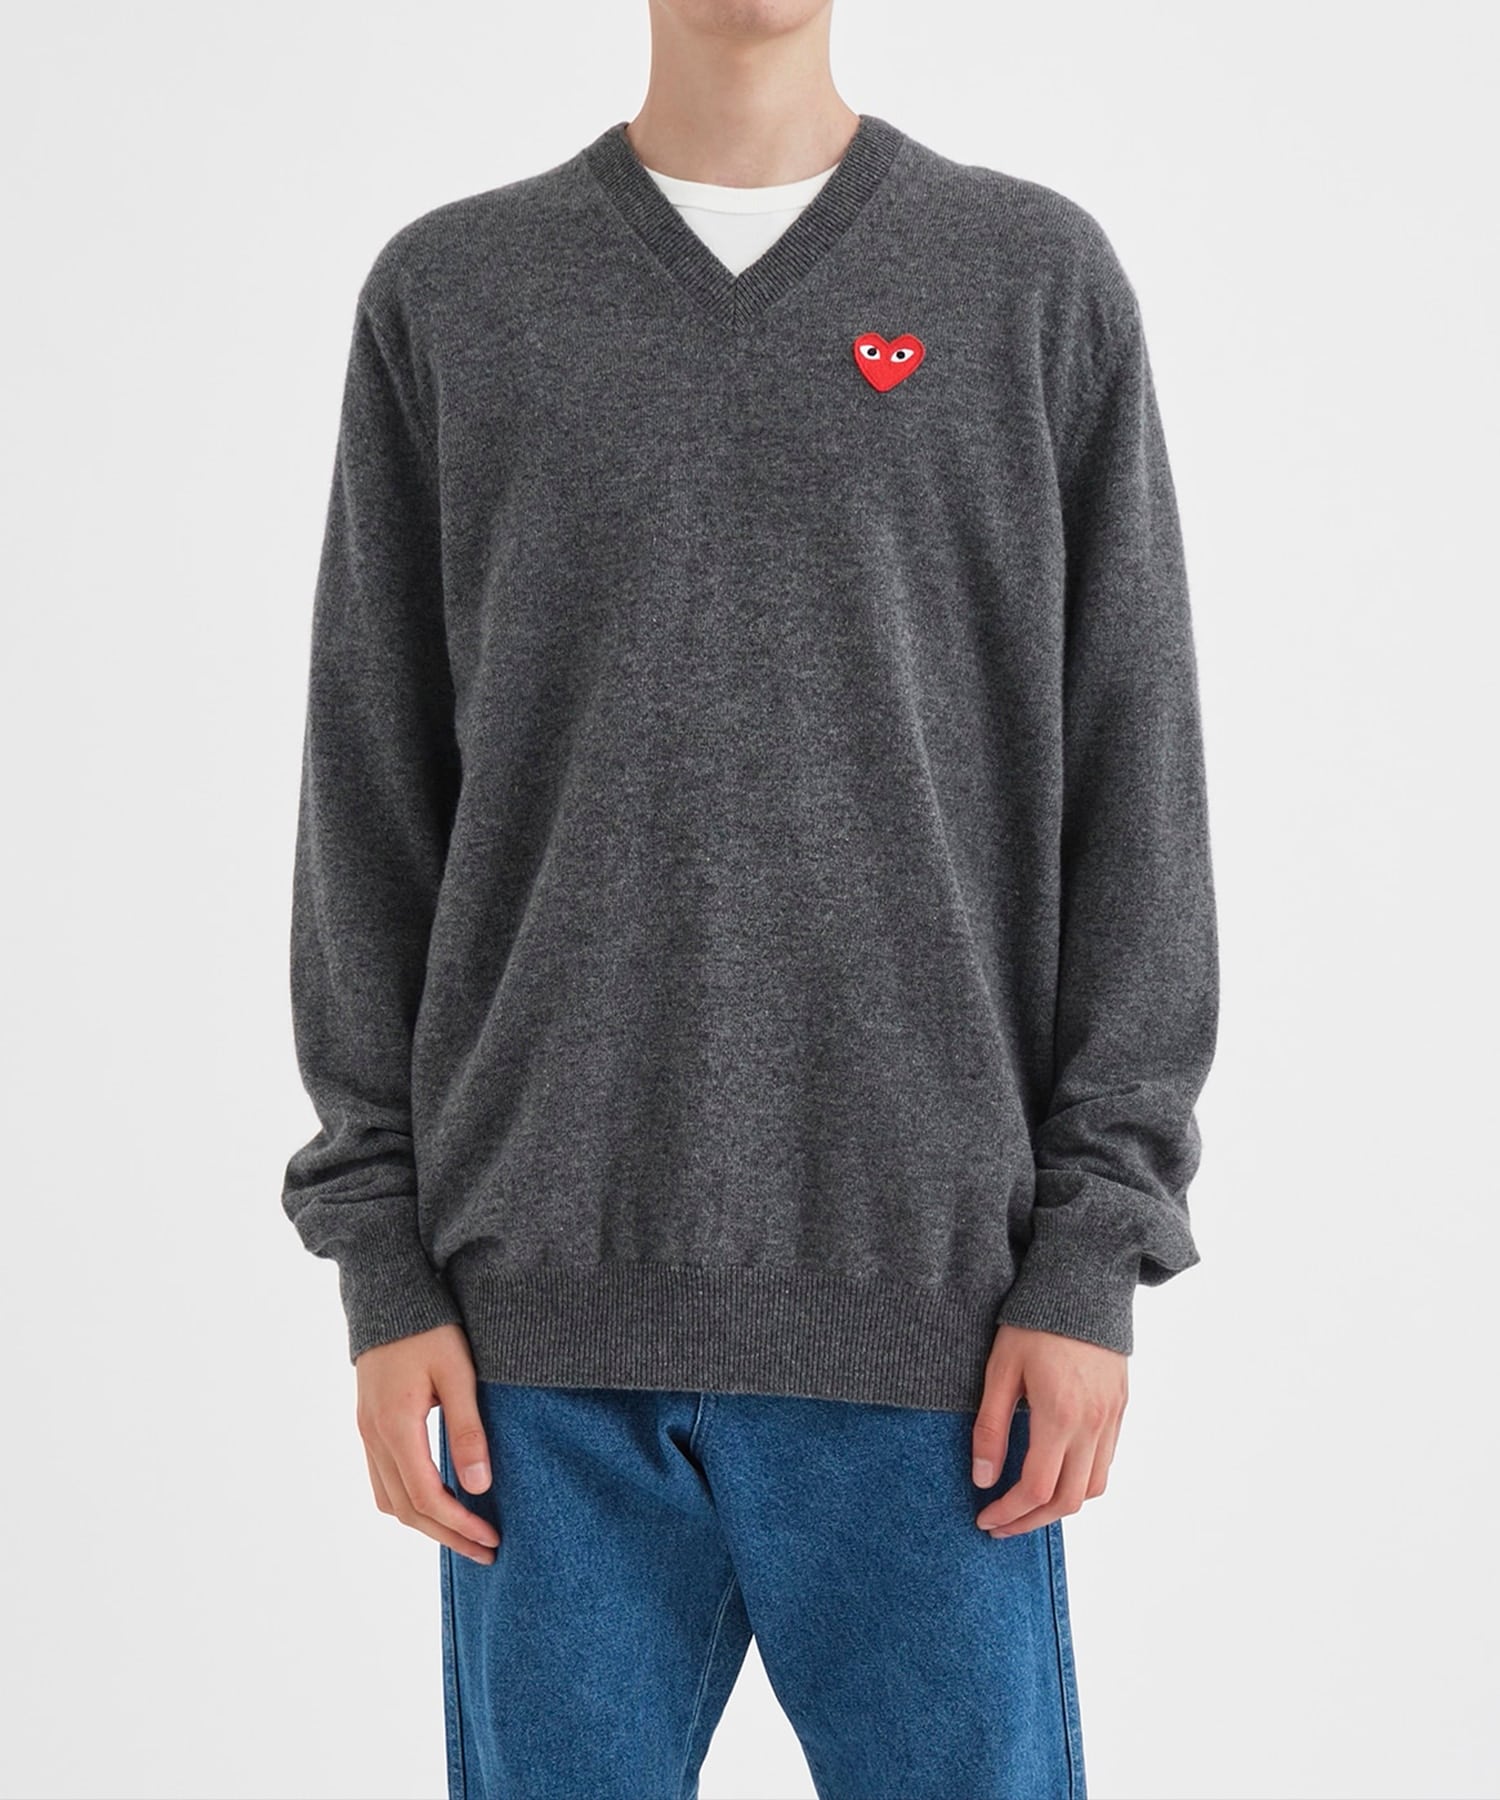 AZ-N002-051 PLAY V-NECK PULLOVER RED HEART PLAY COMME des GARCONS